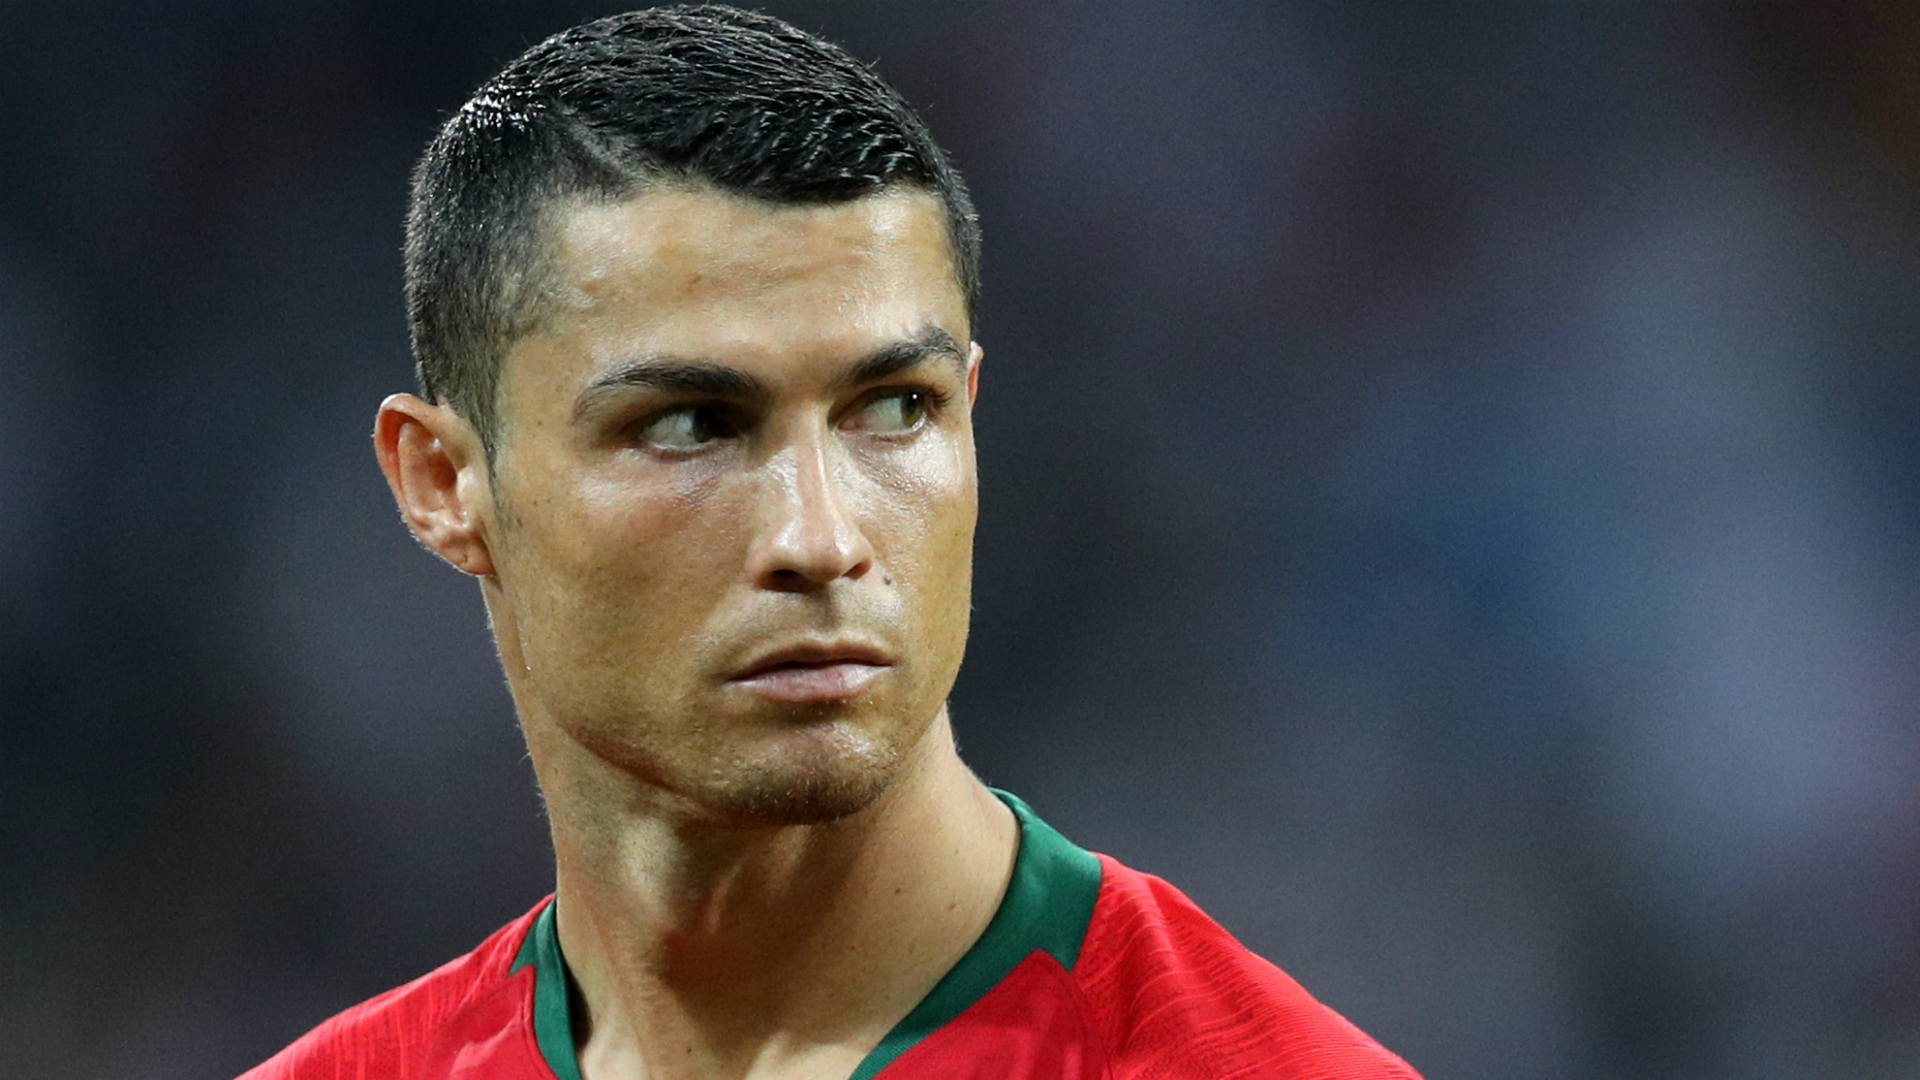 Cristiano Ronaldo is not losing faith in Portugal's qualifying campaign following another draw on home soil.